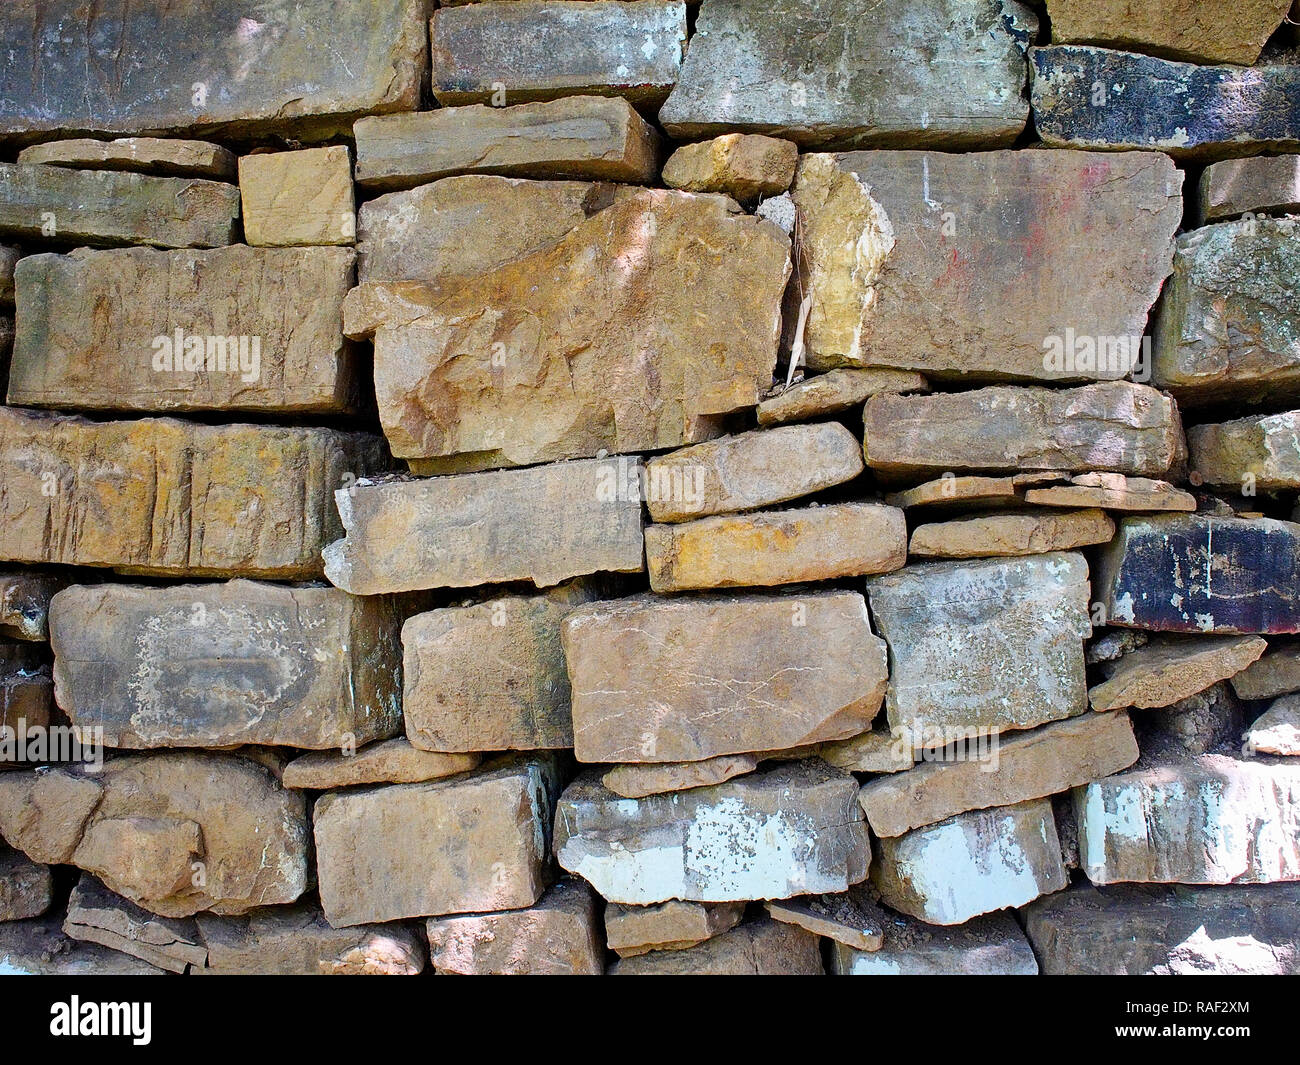 An unfinished wall made of raw stones and bricks Stock Photo